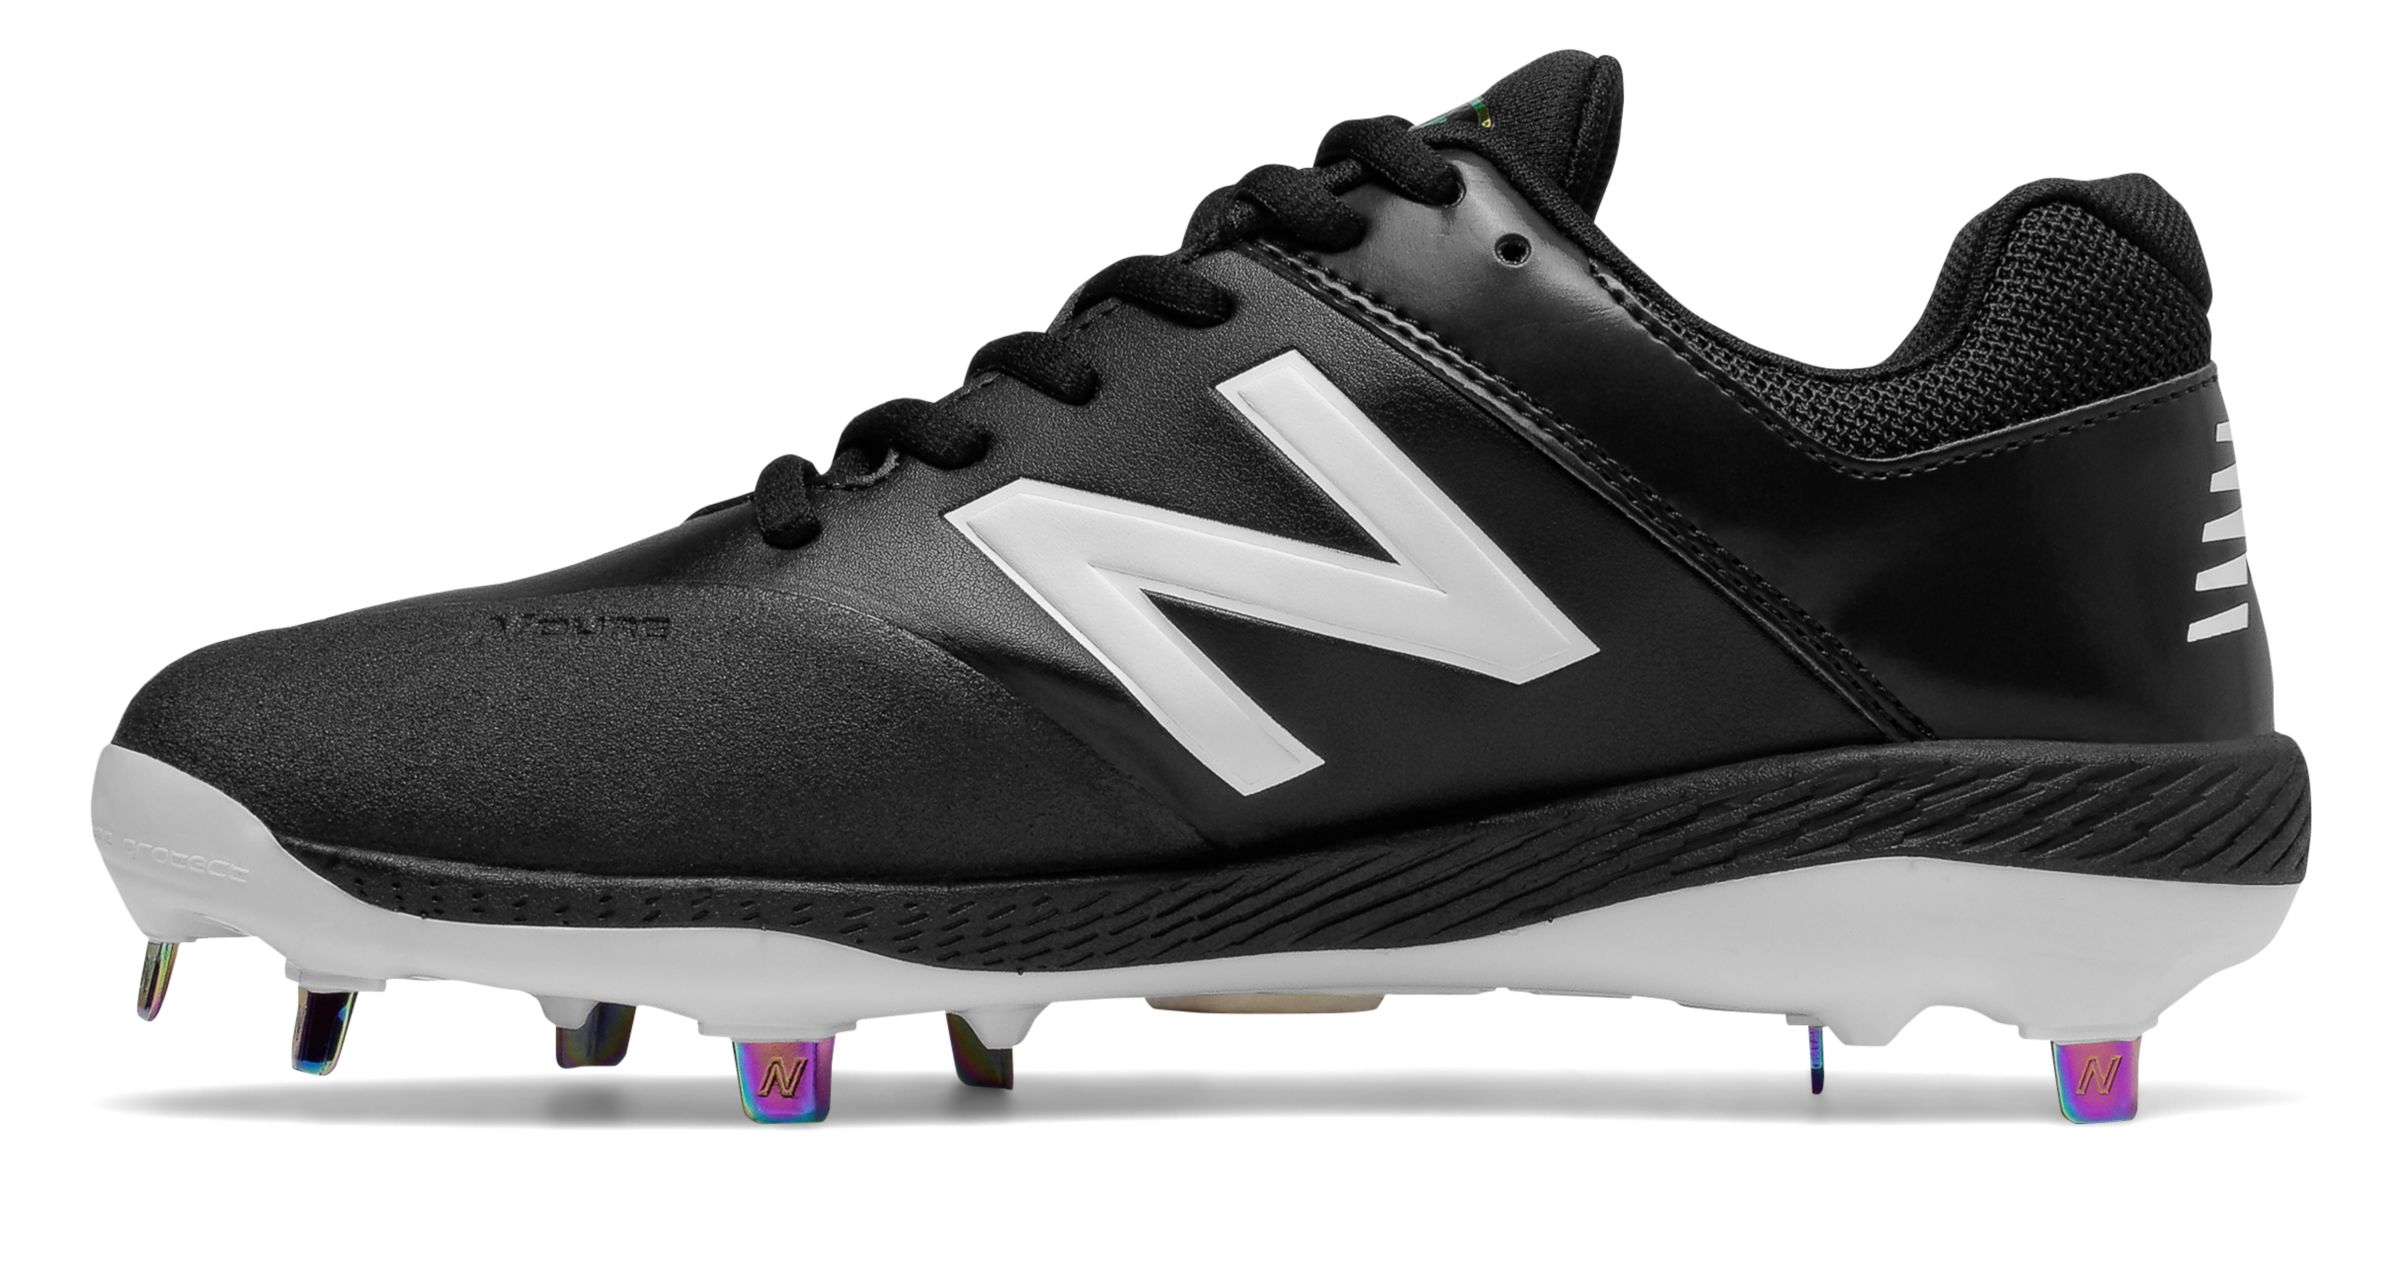 new balance low cut fuse1 metal cleat